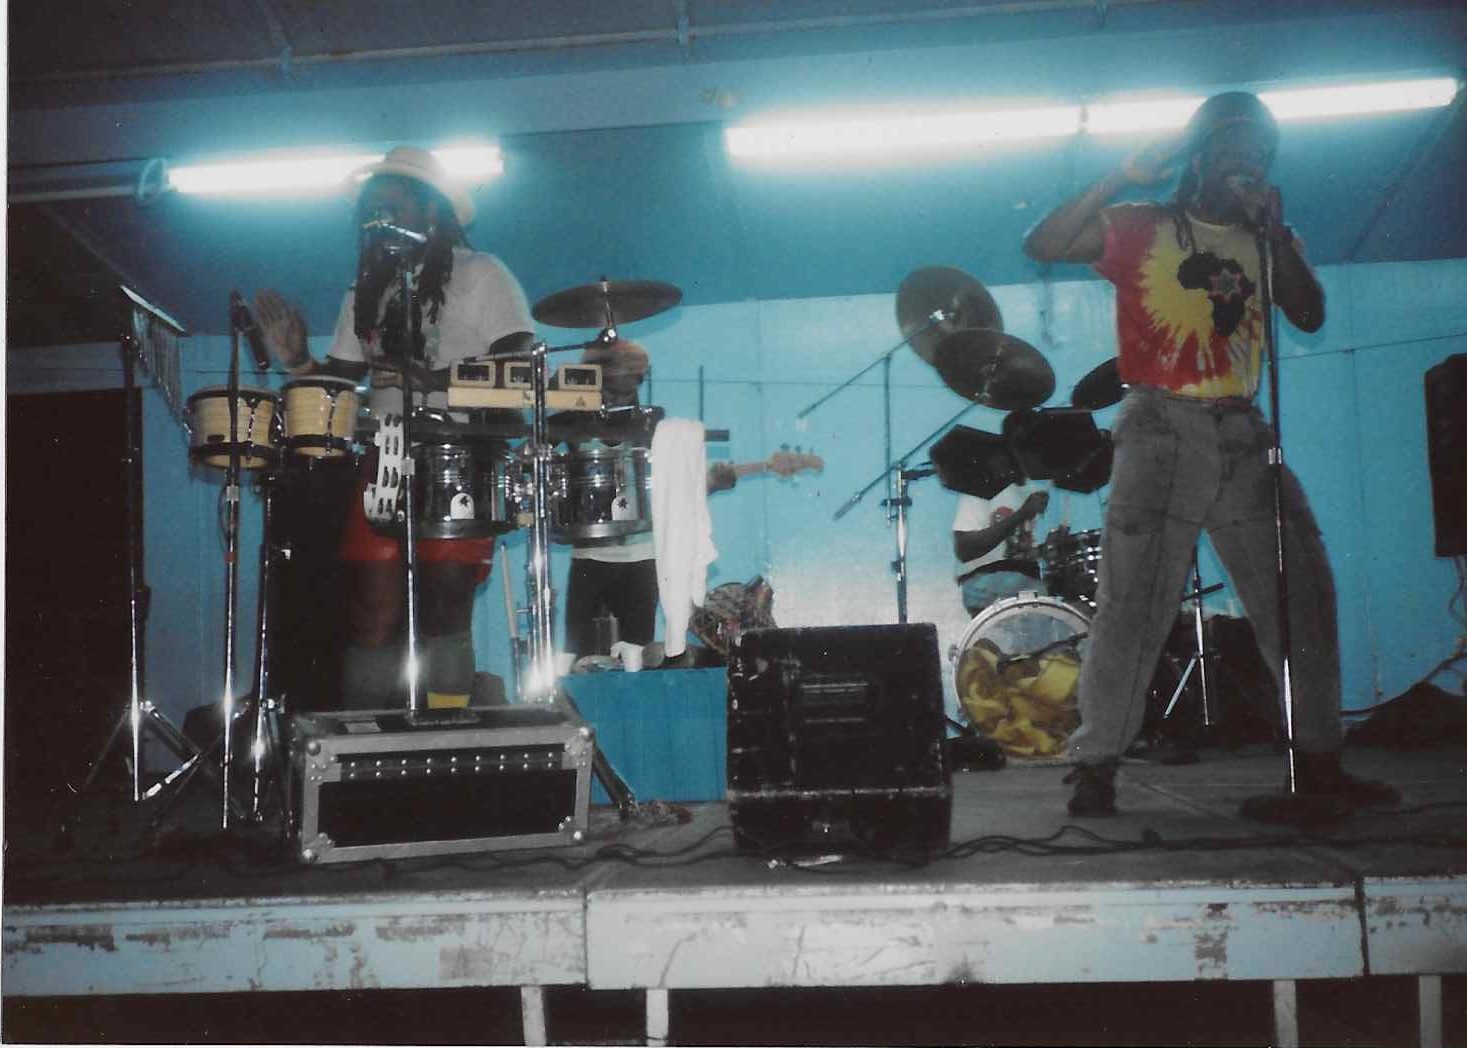 An image of a band performing in a venue against a bright blue wall.